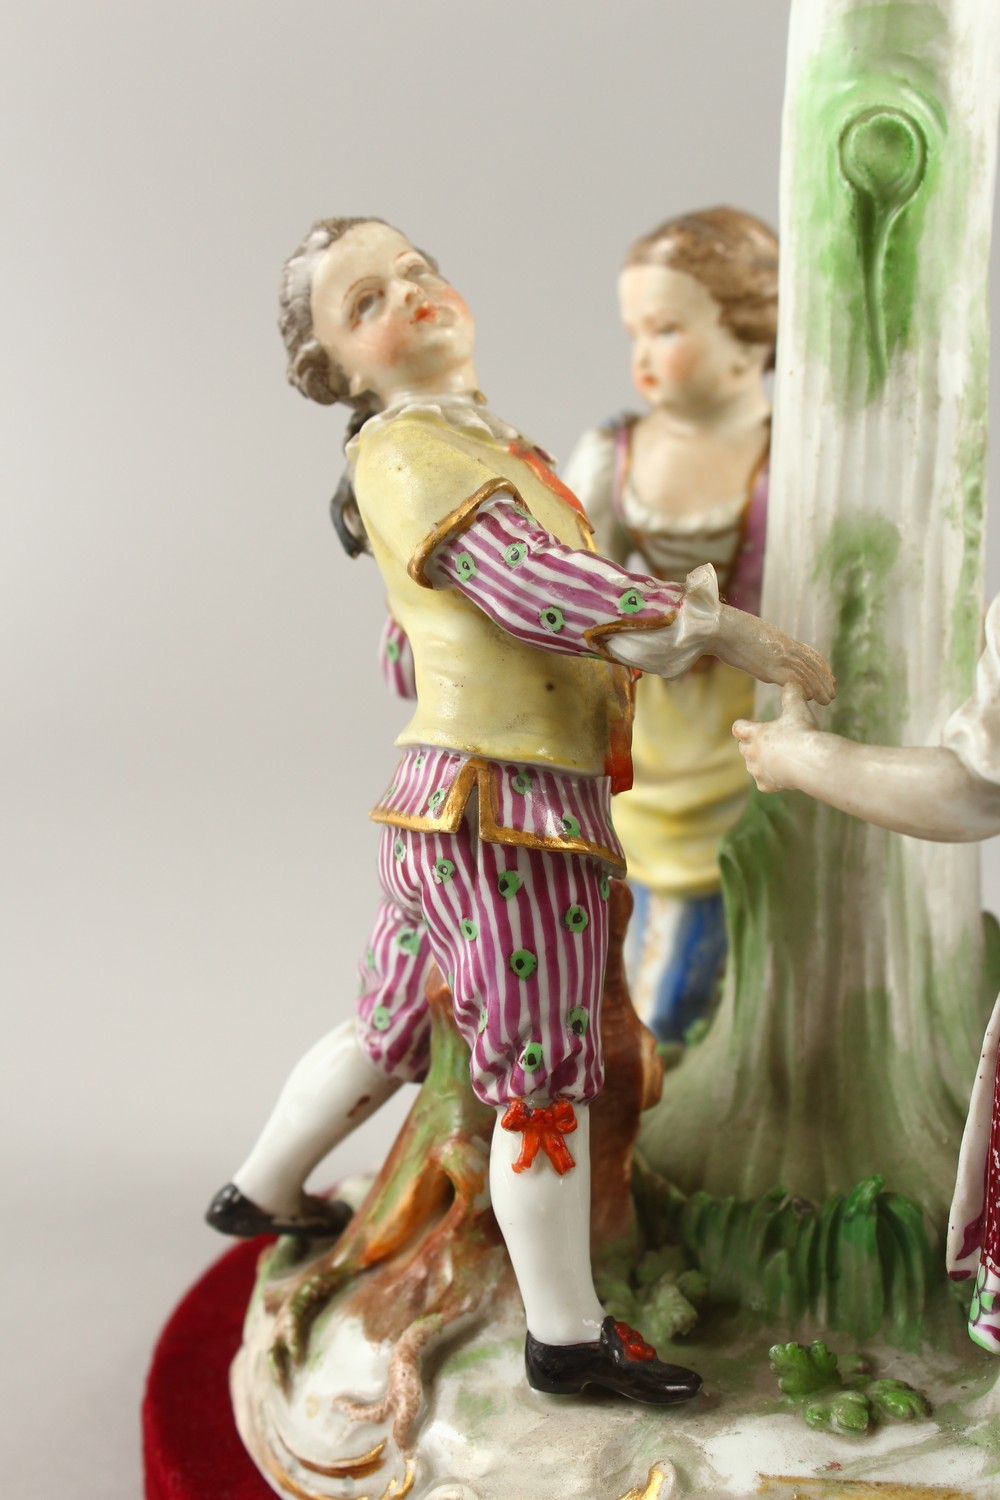 A 19TH CENTURY MEISSEN PATTERN GROUP, "RING-A-RING O' ROSES", four young figures dancing around a - Image 5 of 22